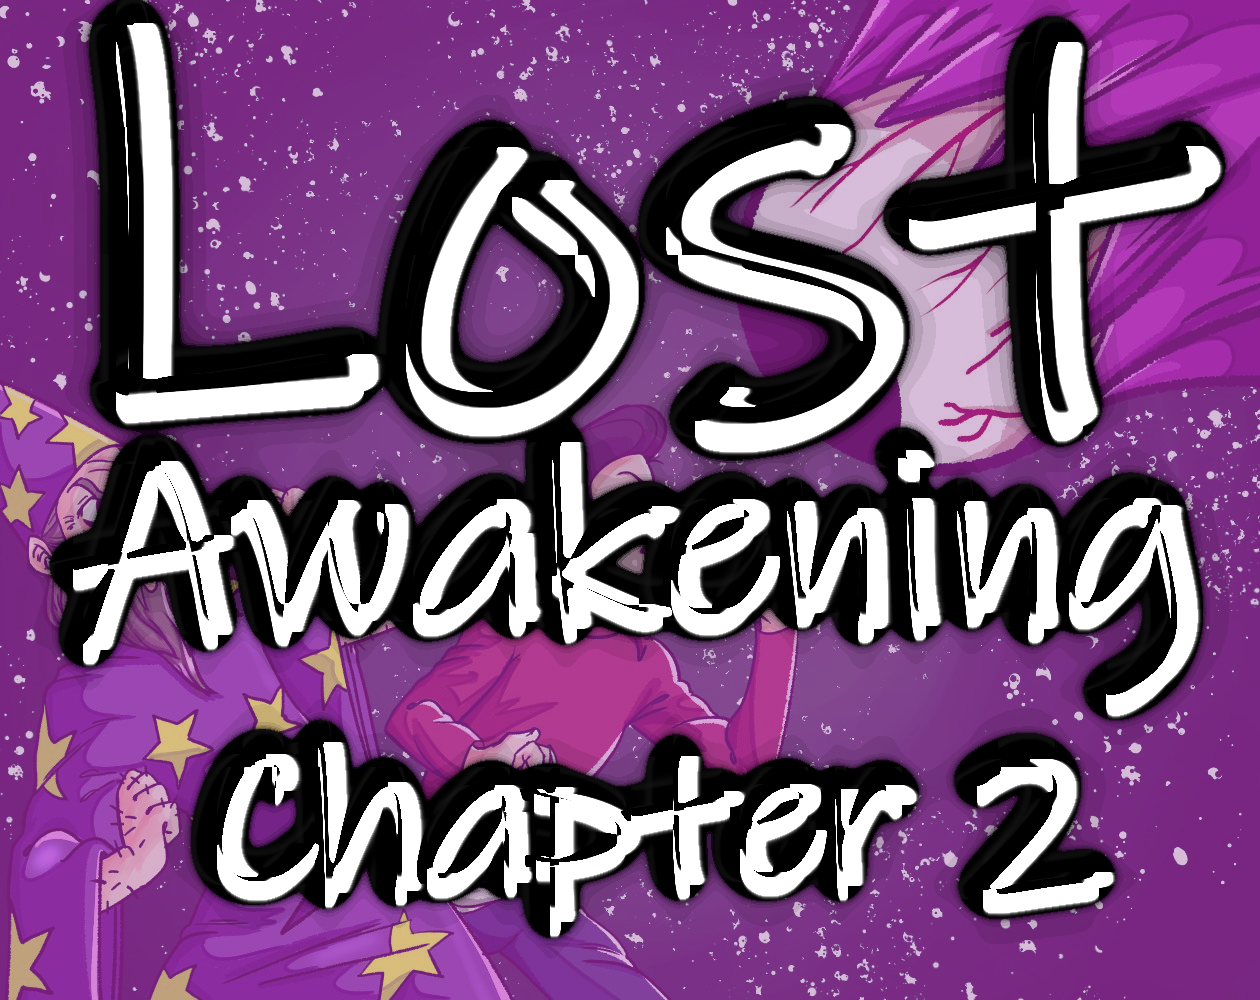 chapter-2-of-lost-awakening-is-now-available-lost-awakening-chapter-2-by-hambug-games